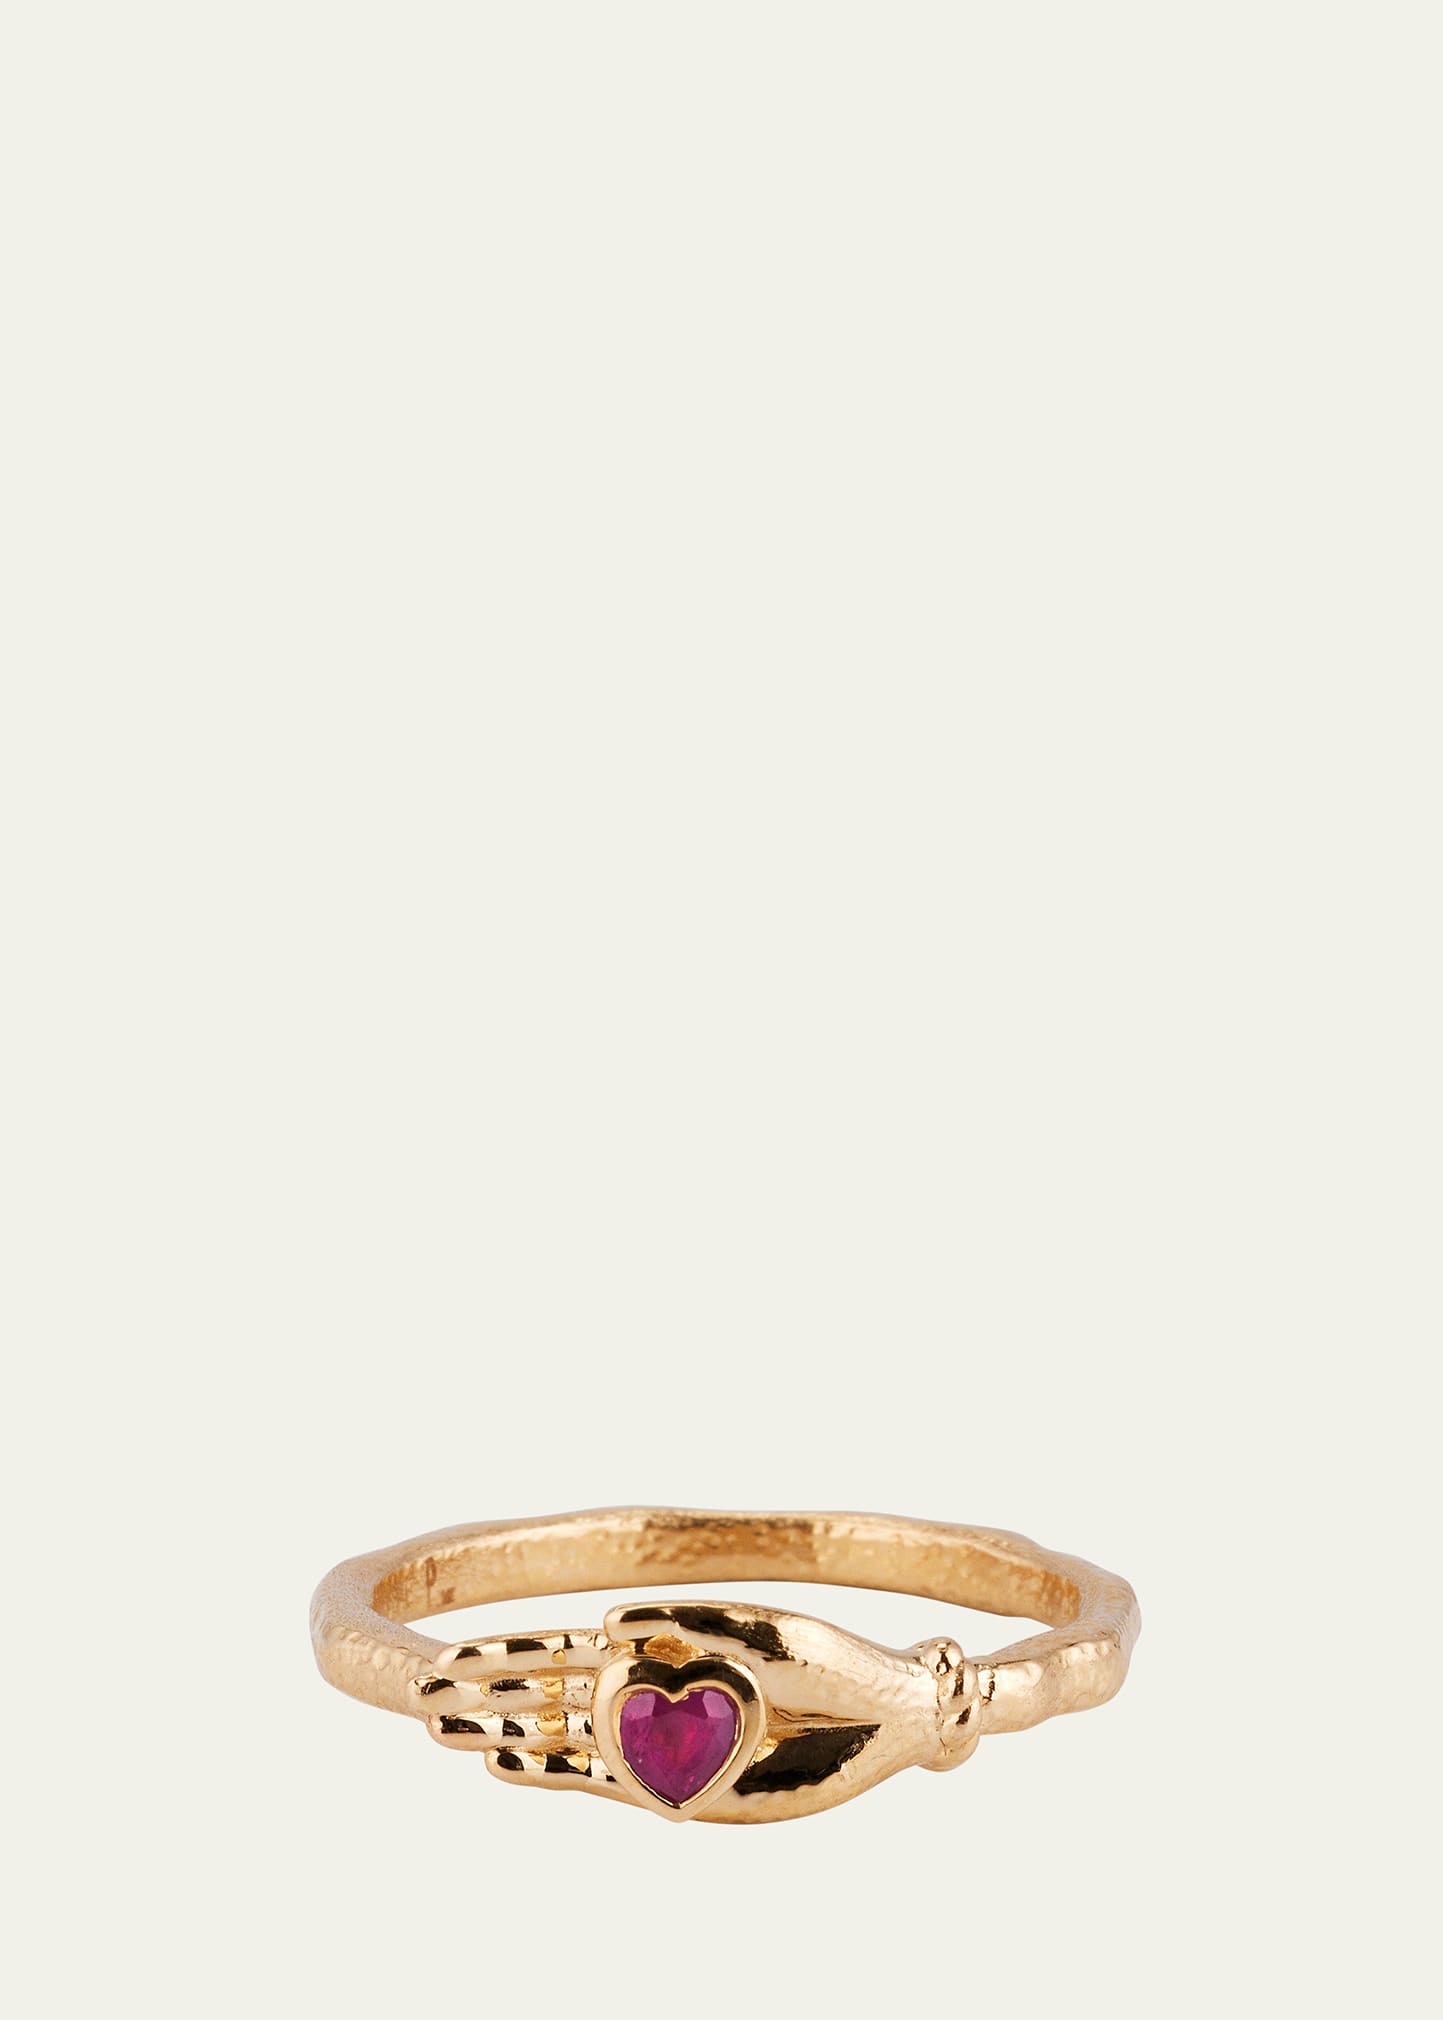 14K Yellow Gold Heart in Hand Ring with Ruby